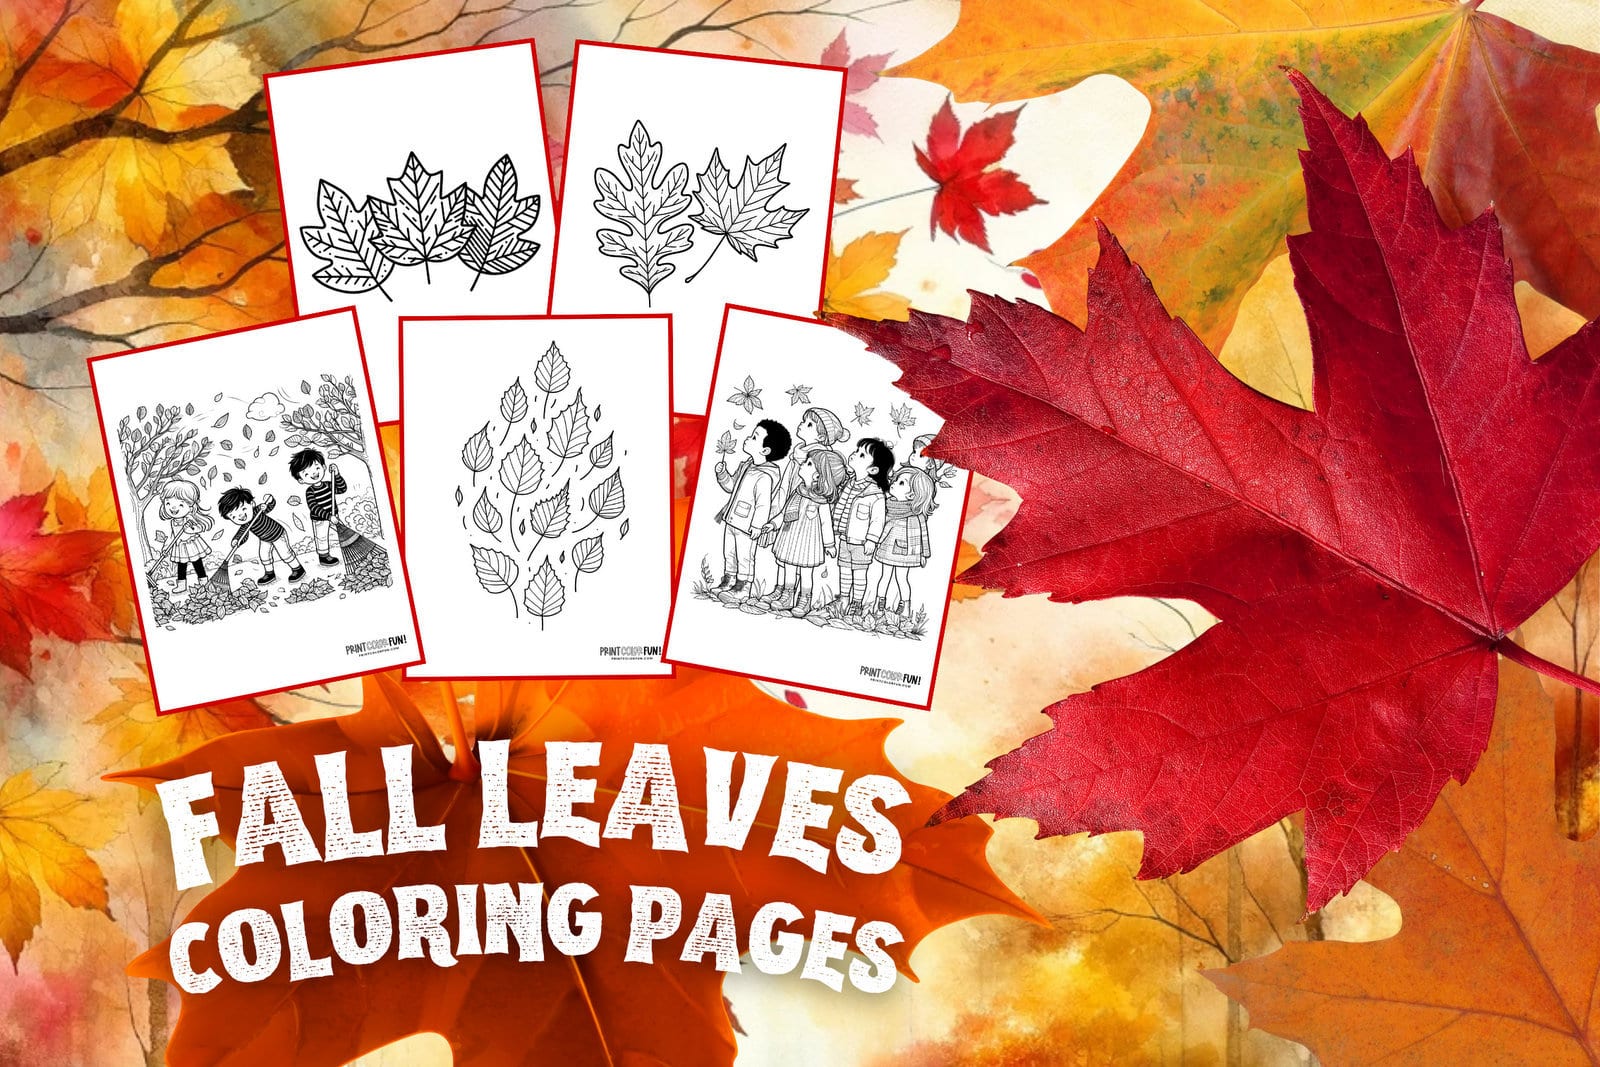 Fall leaf coloring pages with easy craft learning activities that will spark young imaginations at